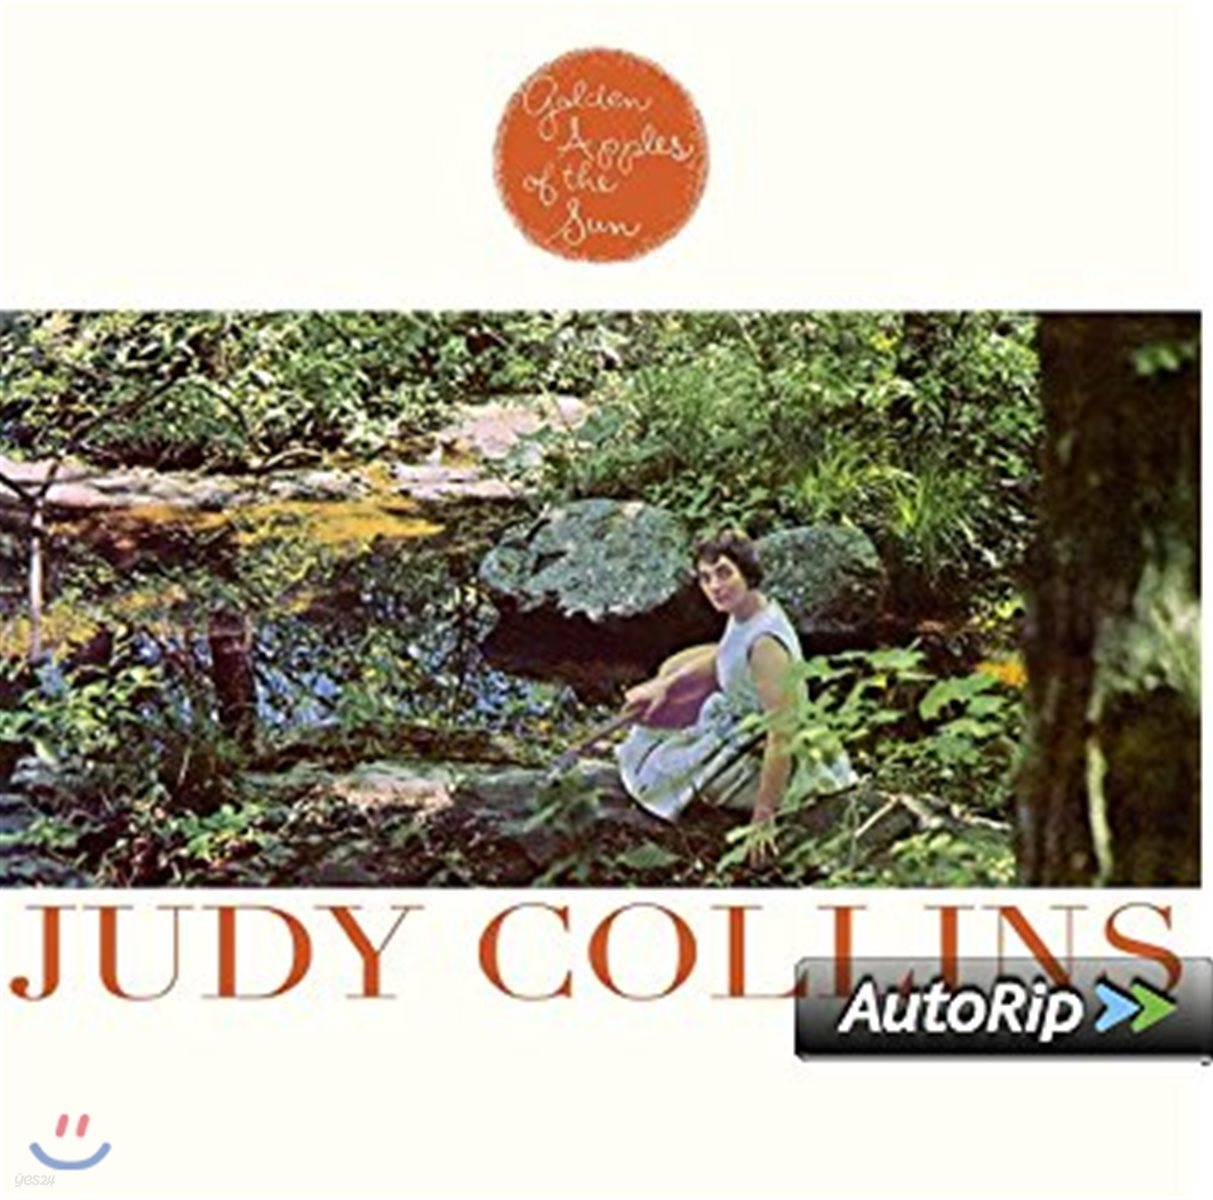 Judy Collins (주디 콜린스) - Golden Apples Of The Sun [Limited Edition LP]